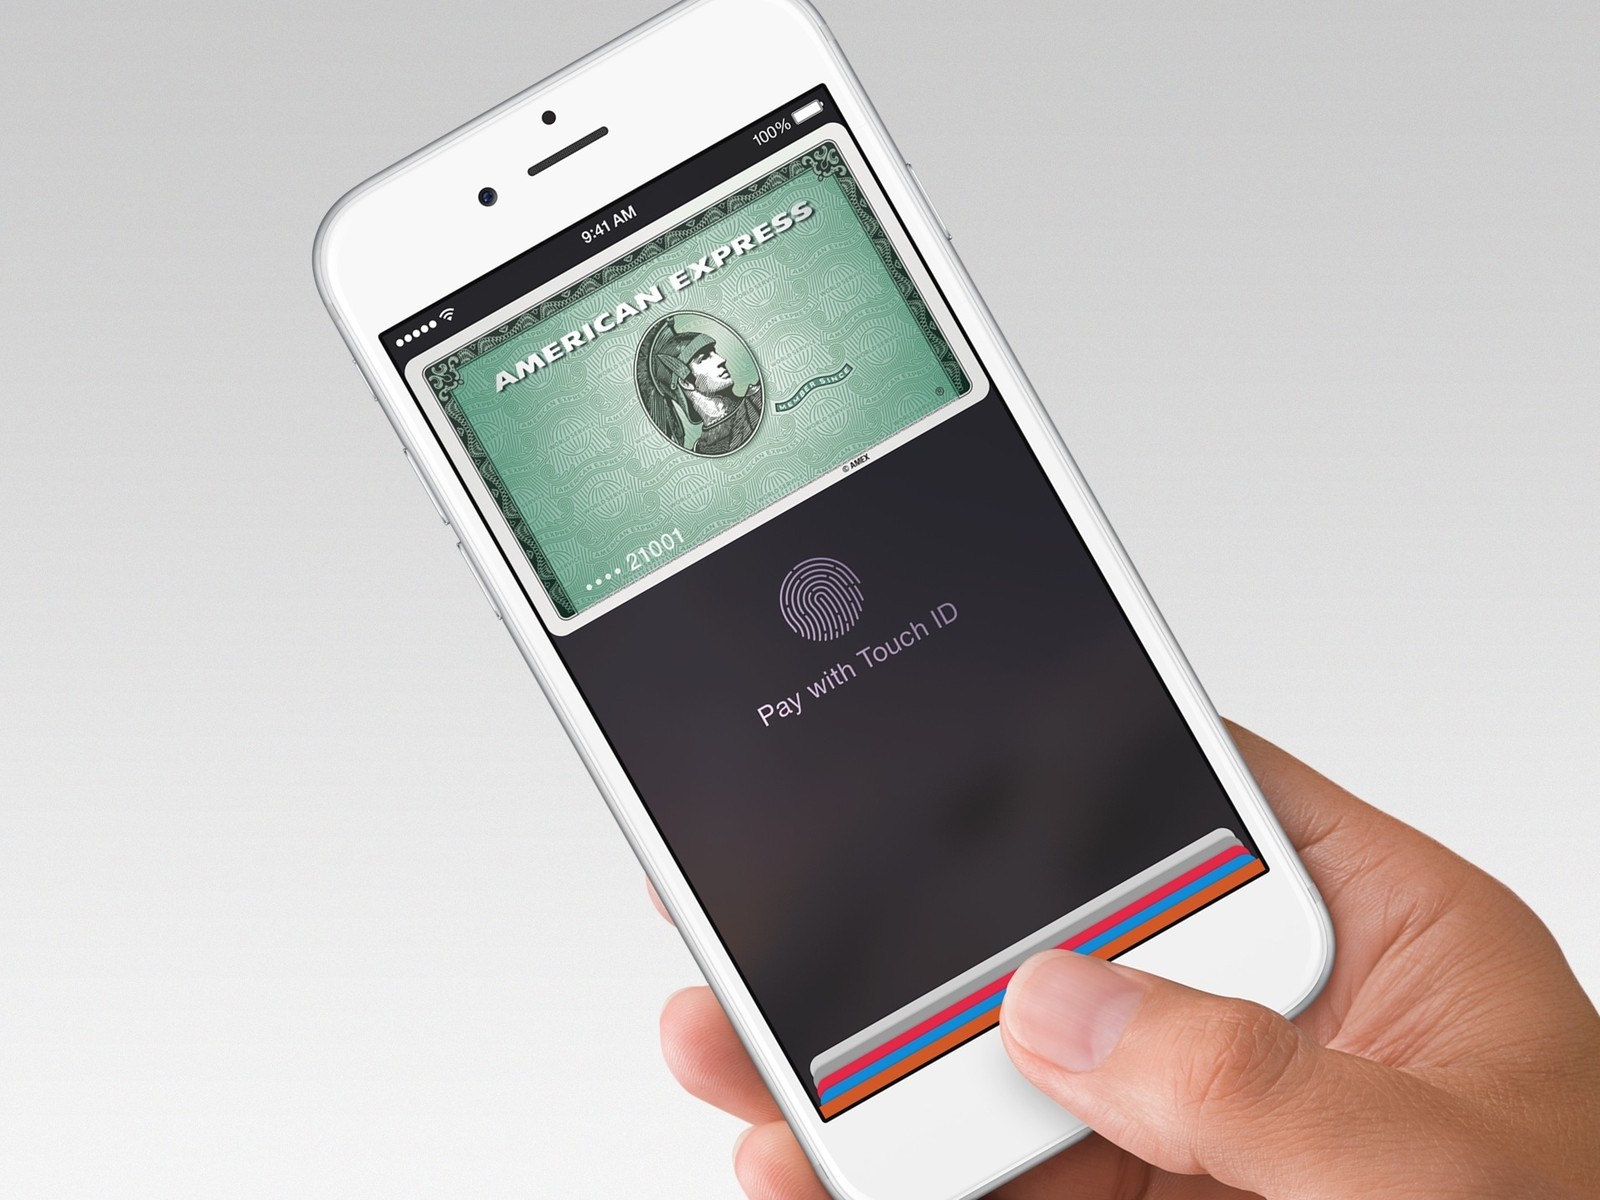 Apple is “working fast” to bring Apple Pay to Europe and Asia